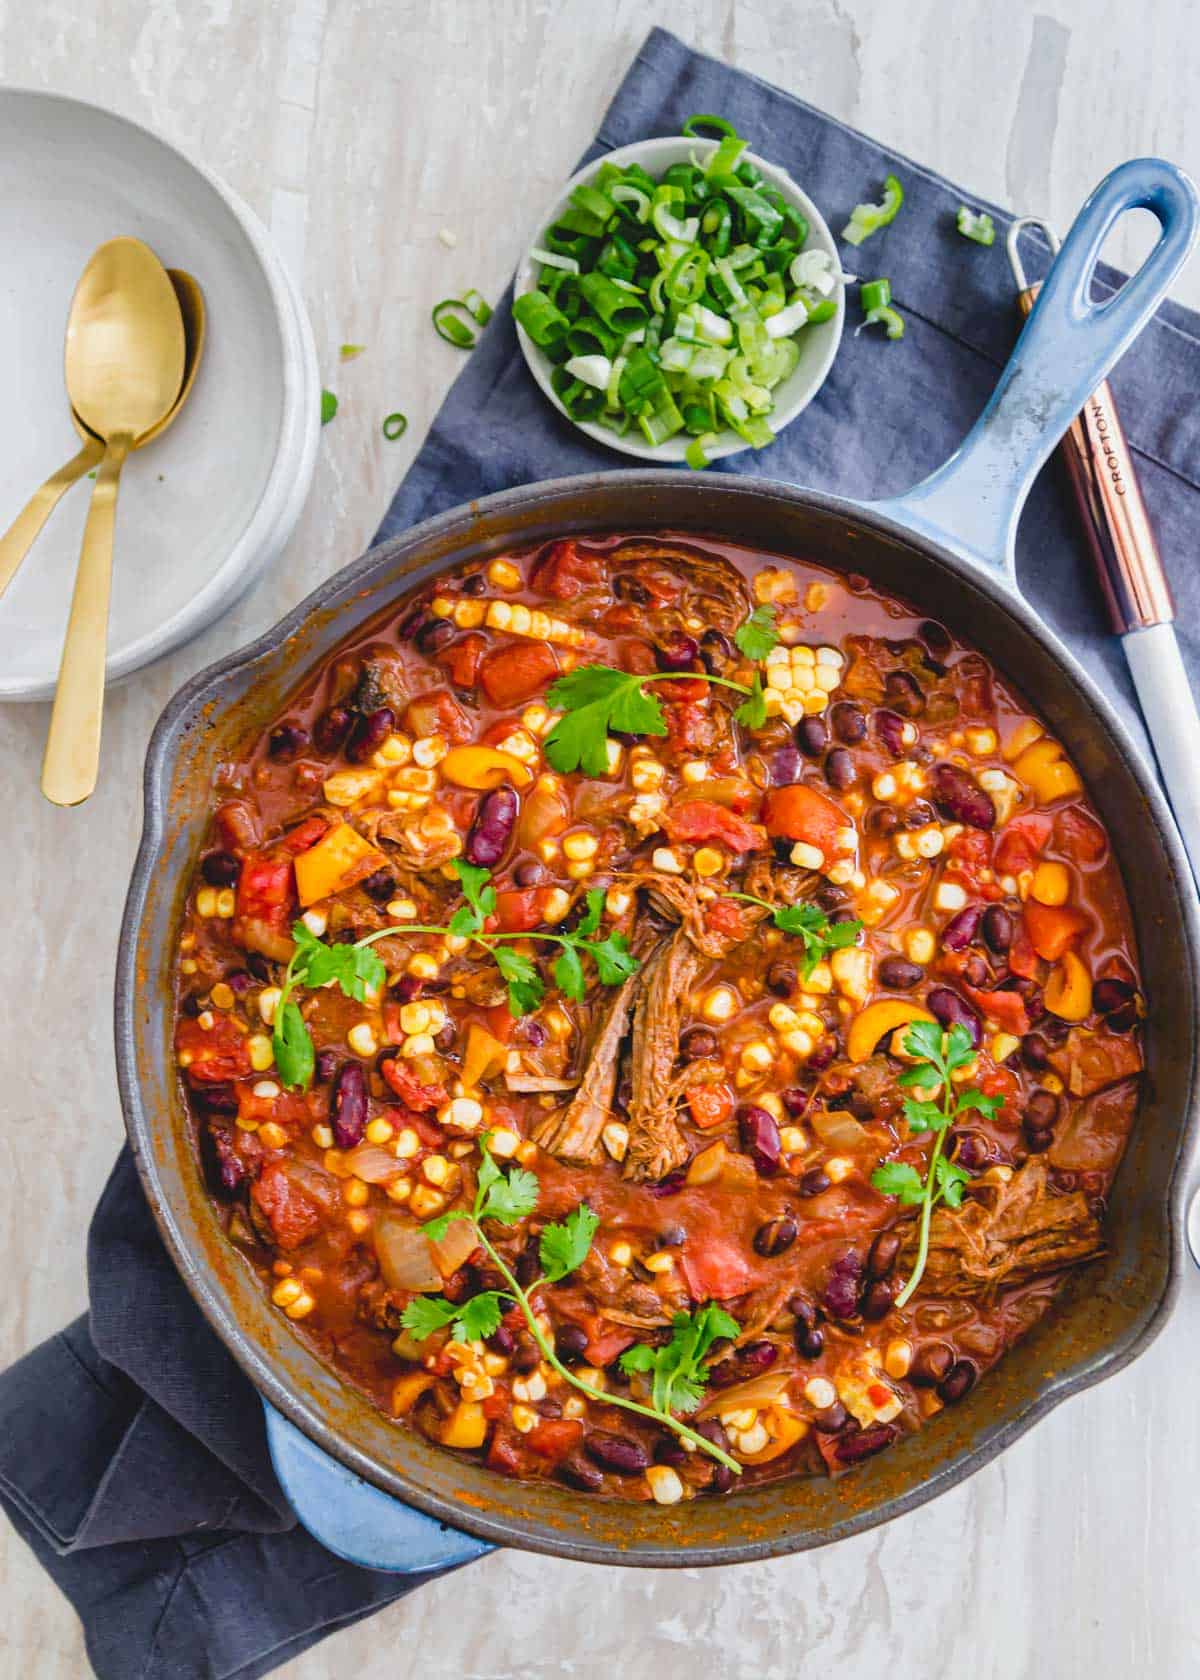 Hearty brisket chili made with kidney beans, black beans, peppers and fresh corn.